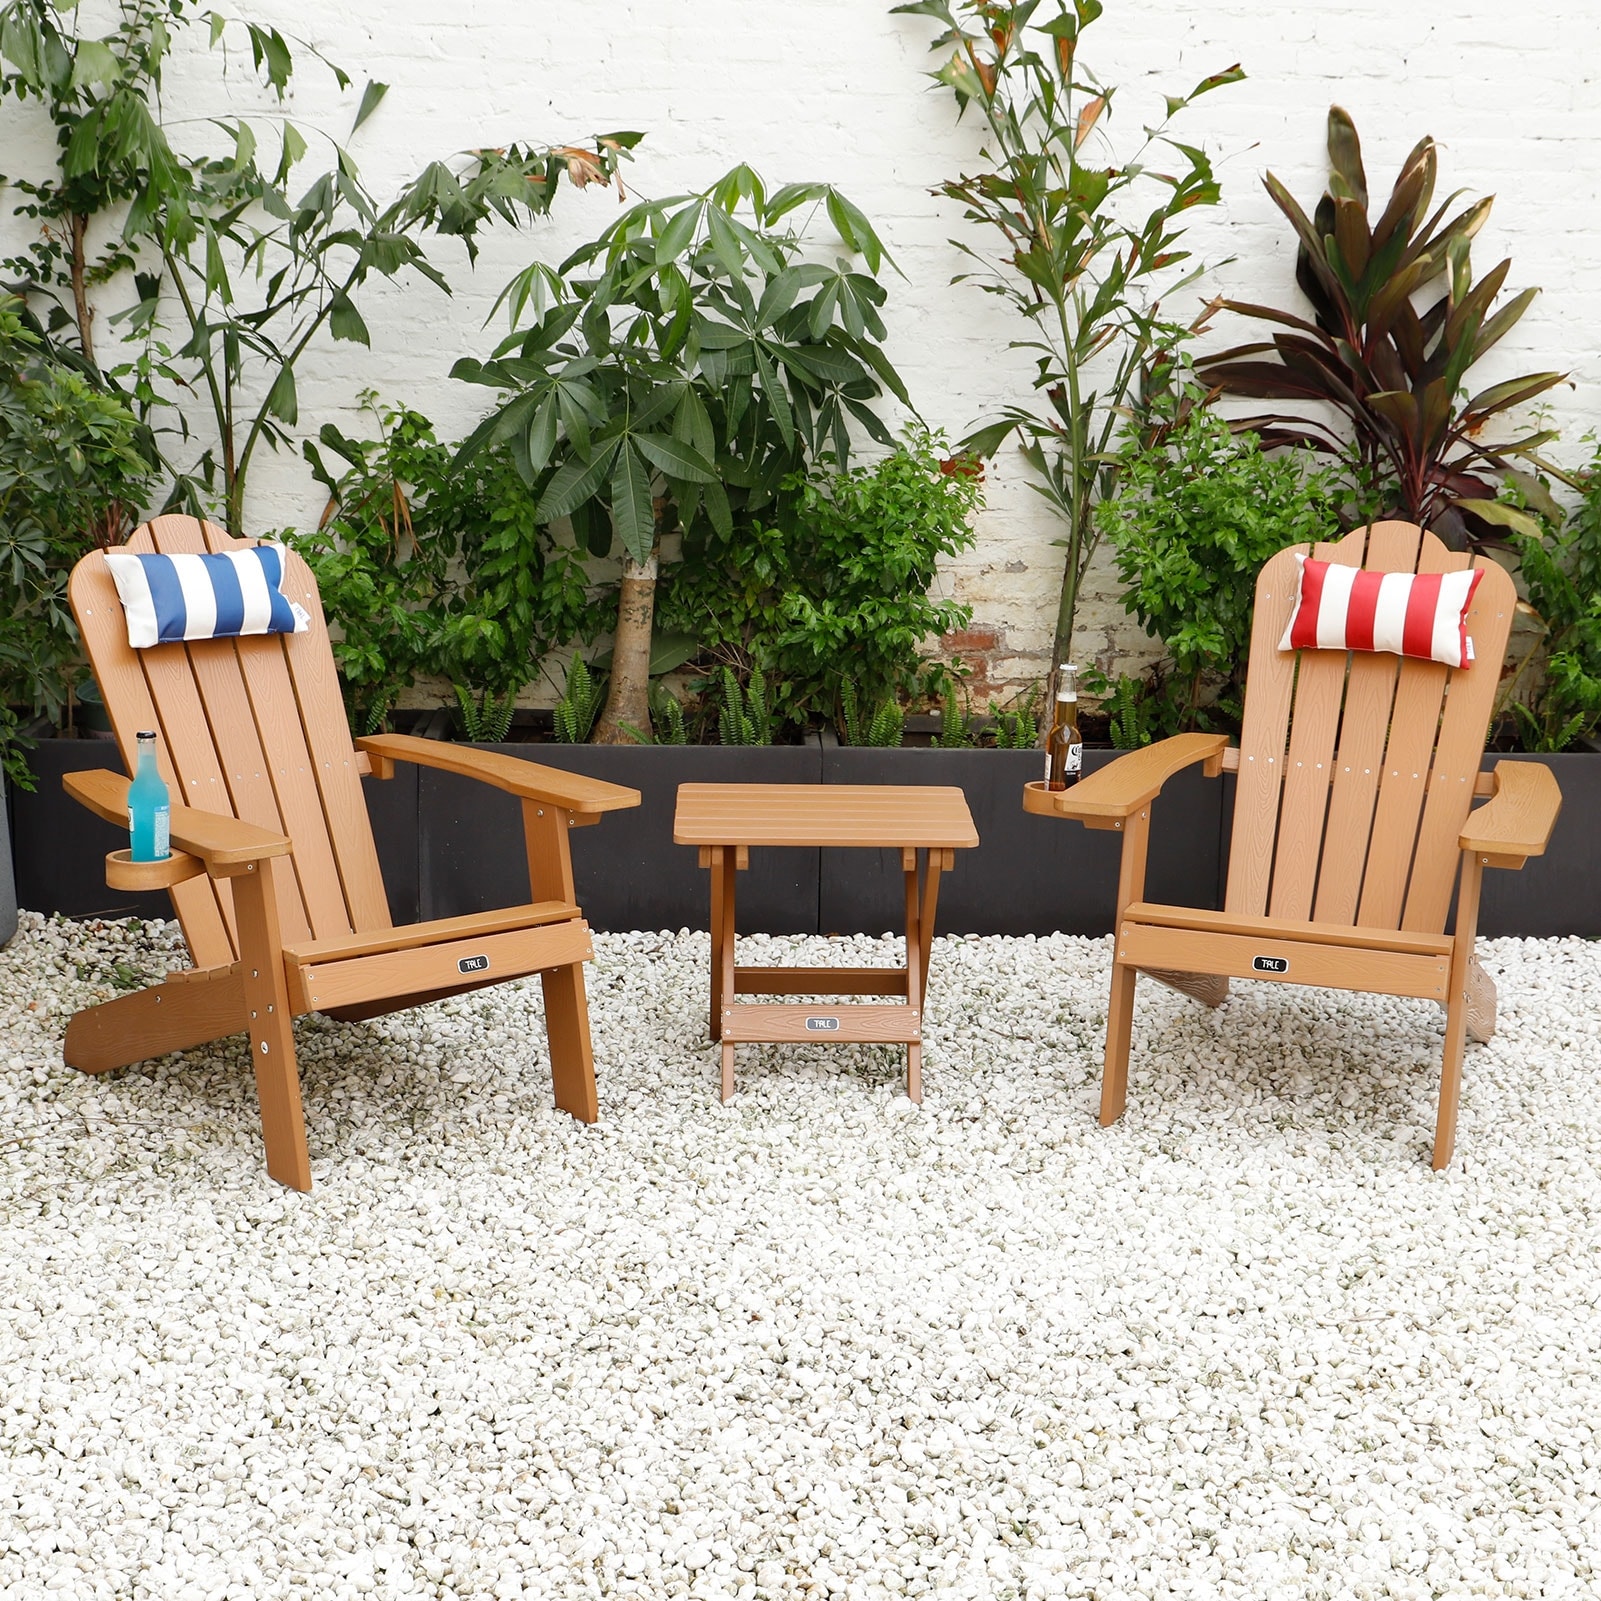 Adirondack Chair With Cup Holder All-weather And Fade-resistant Plastic Wood